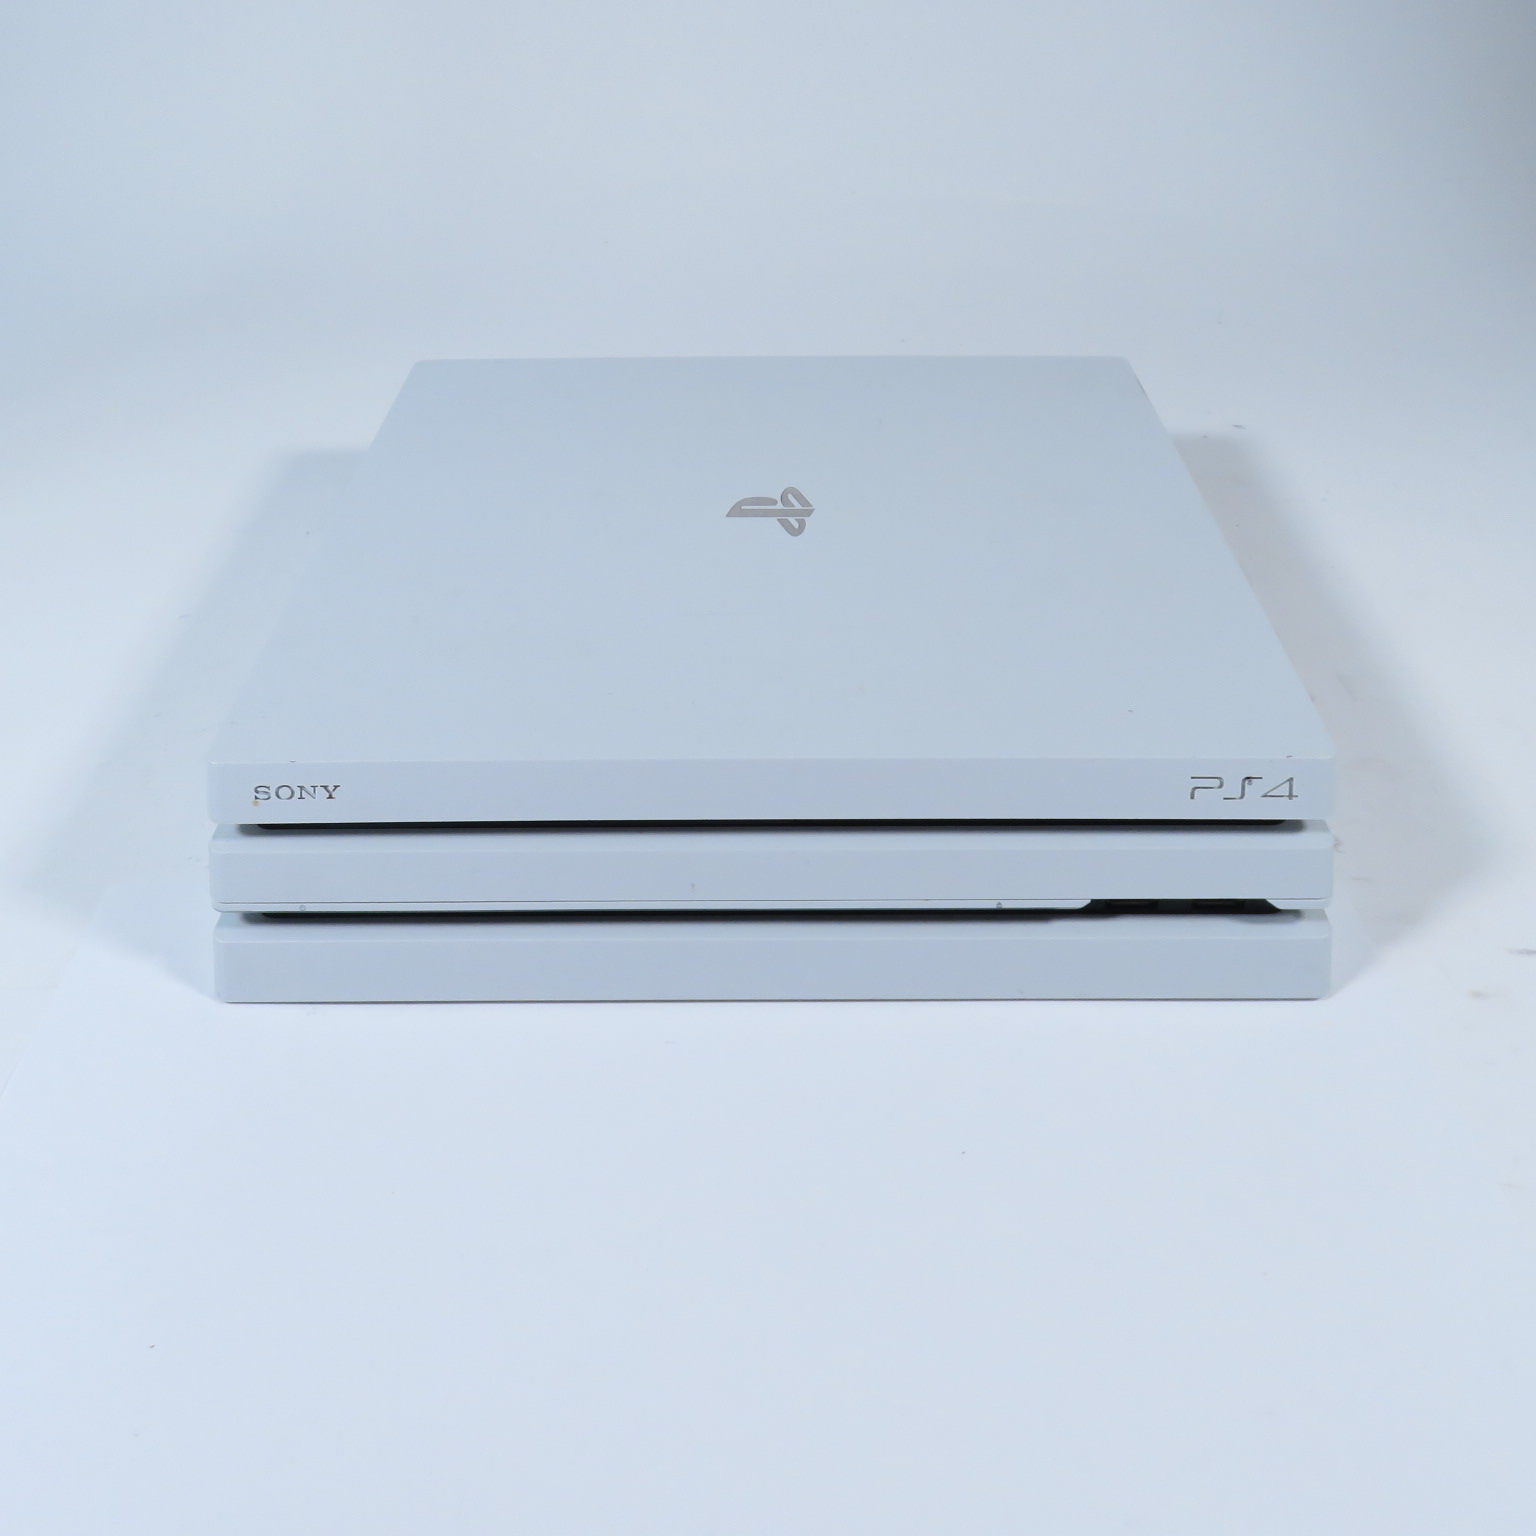 Sony PlayStation 4 Pro CUH-7015B 1TB HDD White Body Home Video Game Console  2080